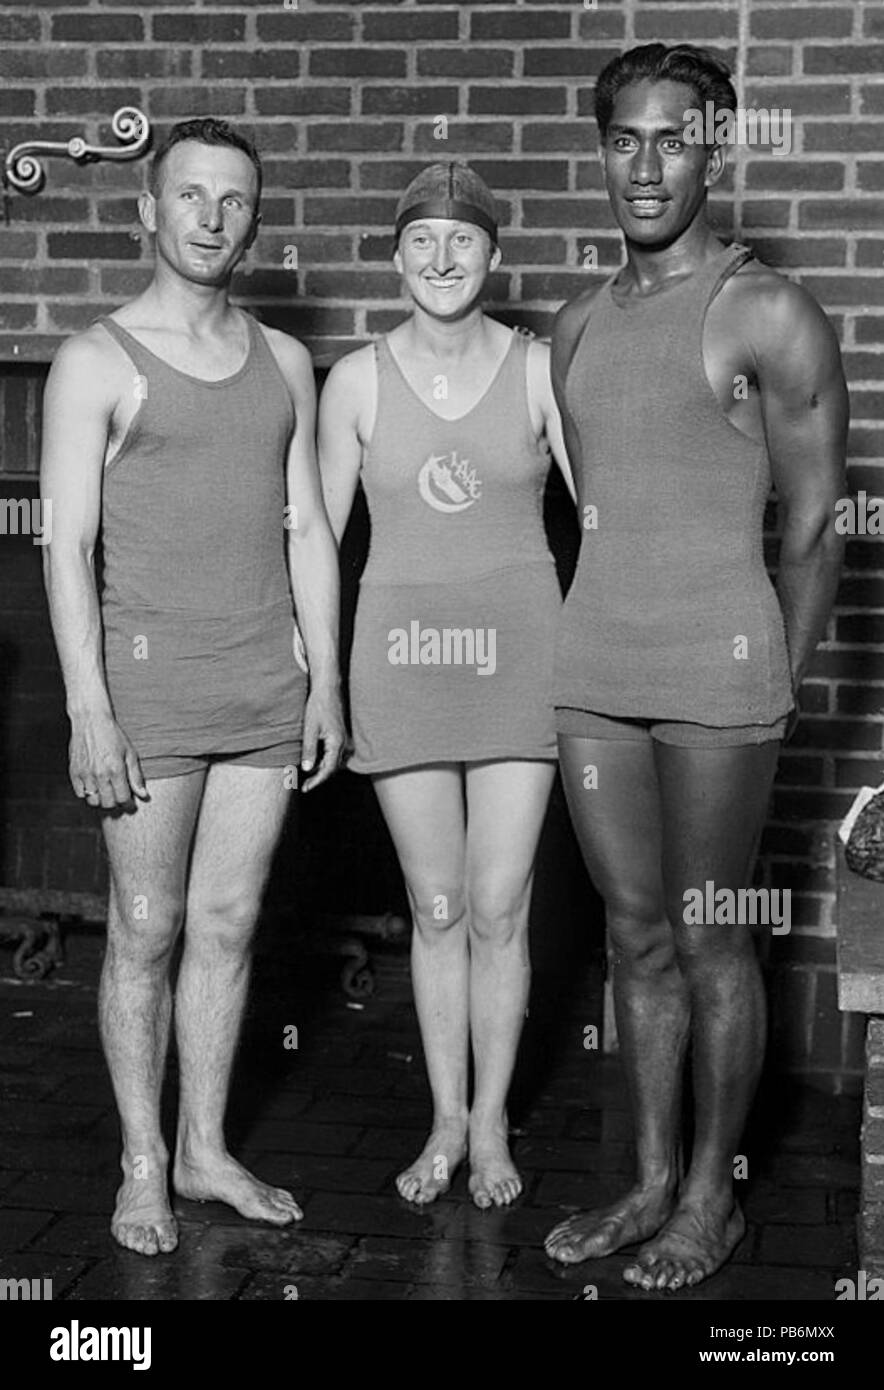 . From left to right, American swimming champions Ludy Langer (1893 - 1984), Claire Galligan and Duke Kahanamoku (1890 - 1968, right), circa 1920. circa 1920 958 Ludy Langer, Claire Galligan, Duke Kahanamoku c1920 Stock Photo